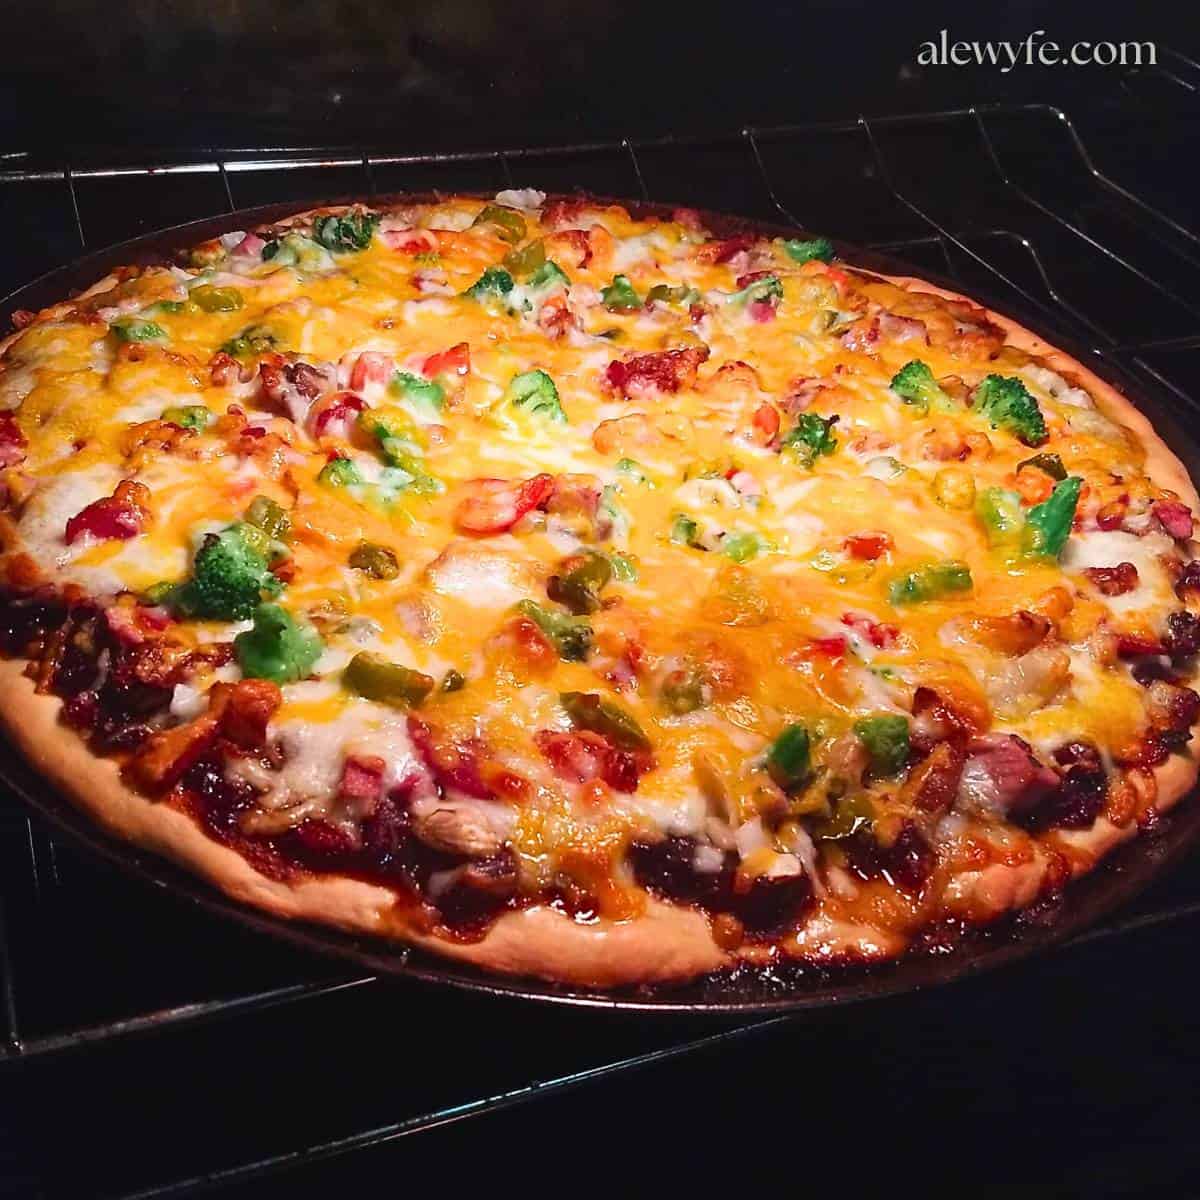 a homemade pizza baking in the oven.